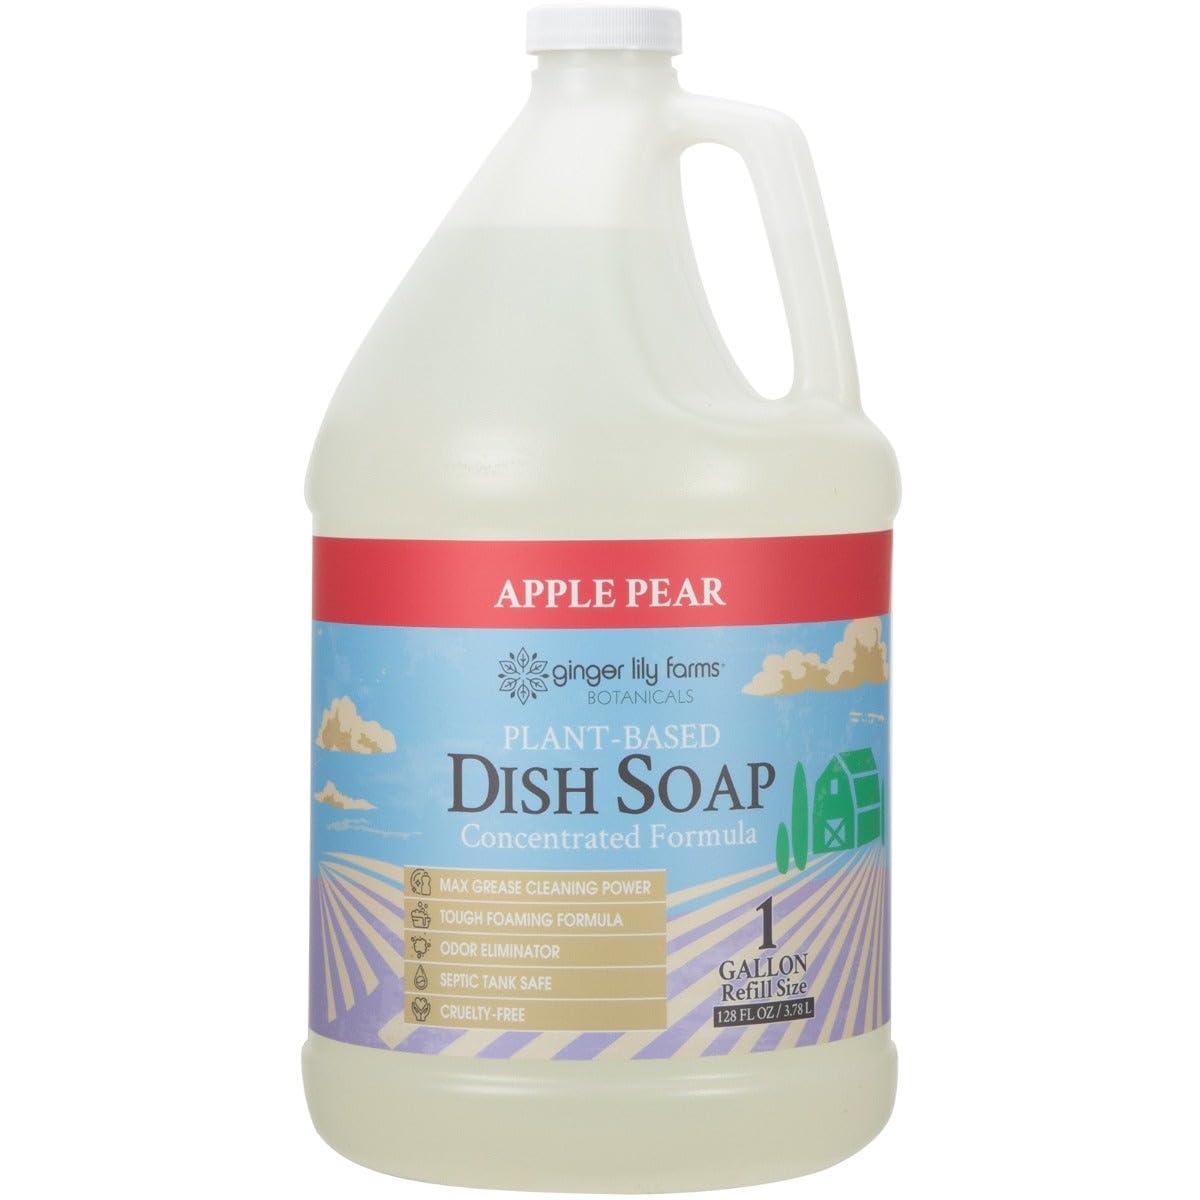 Ginger Lily Farms Botanicals Plant-Based Liquid Dish Soap, Concentrated Formula with Max Grease Cleaning Power, Cruelty-Free, Apple Pear Scent, 1 Gallon Refill (128 Fl. Oz.)